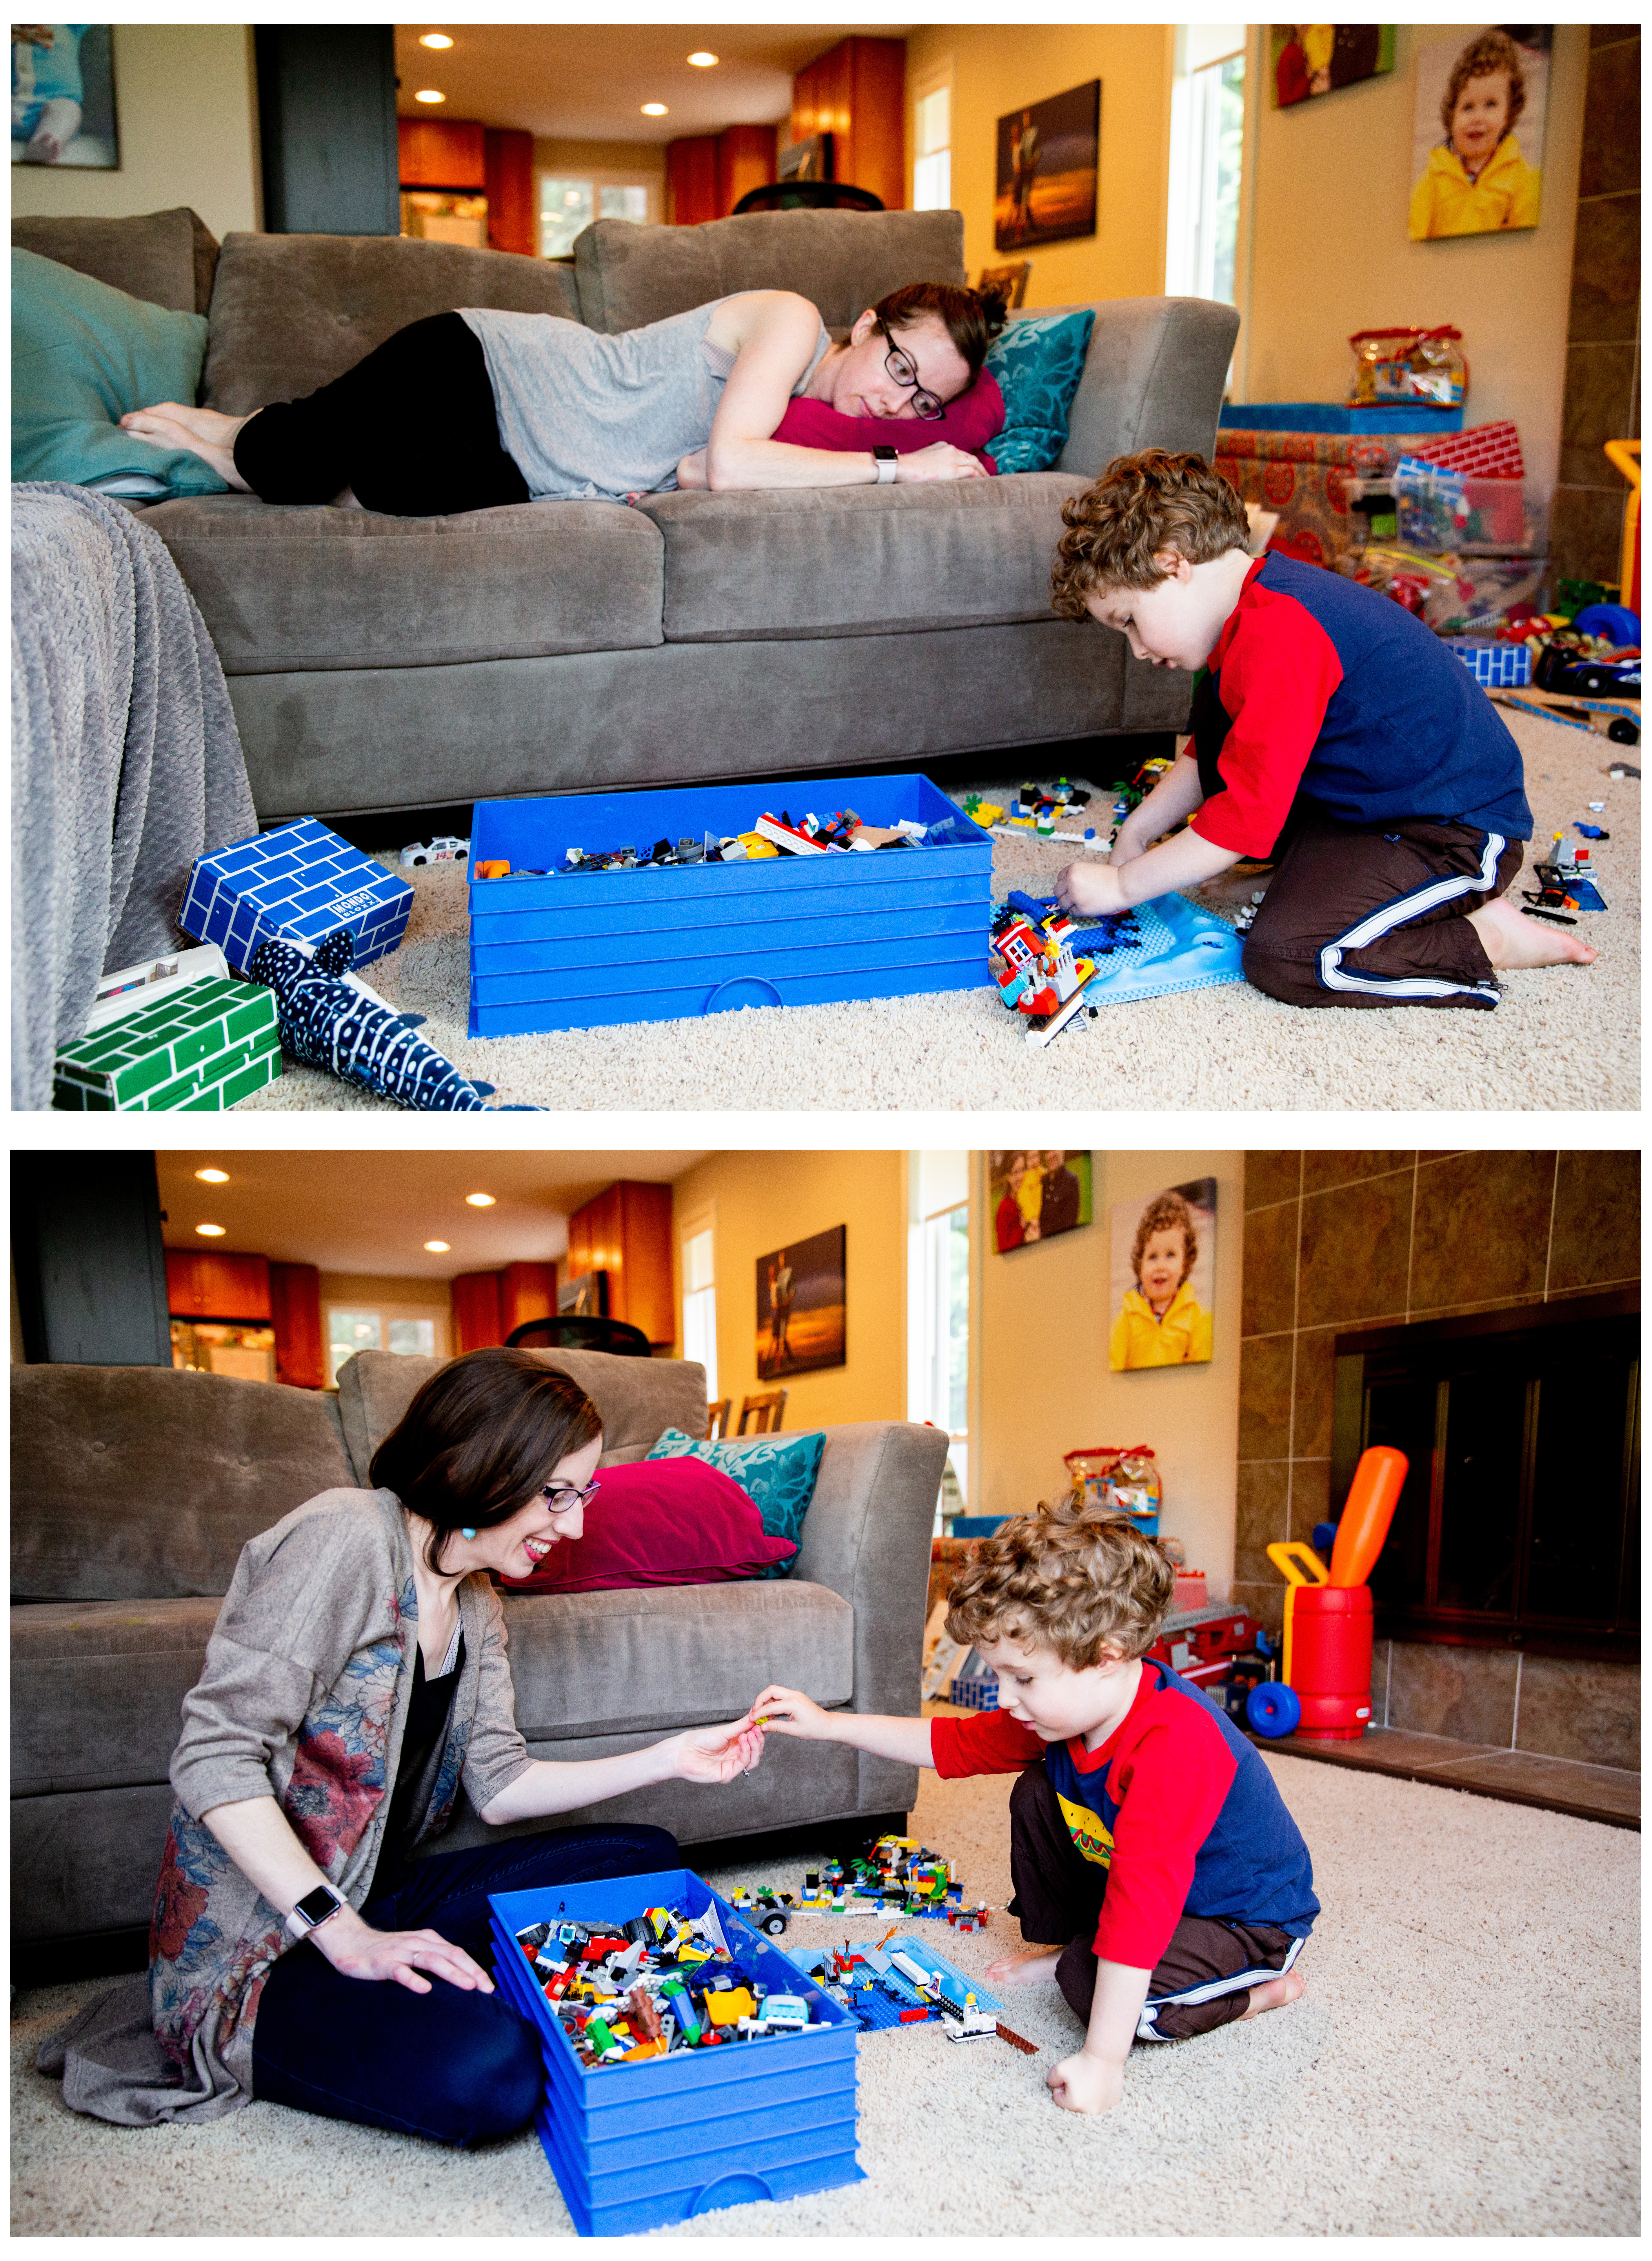 There are two photos in this collage. On top, a woman lays on a couch, wearing pajamas and watching her son play with legos. On the bottom, the mother is fully dressed and sitting directly across from the child and is handing him a lego.